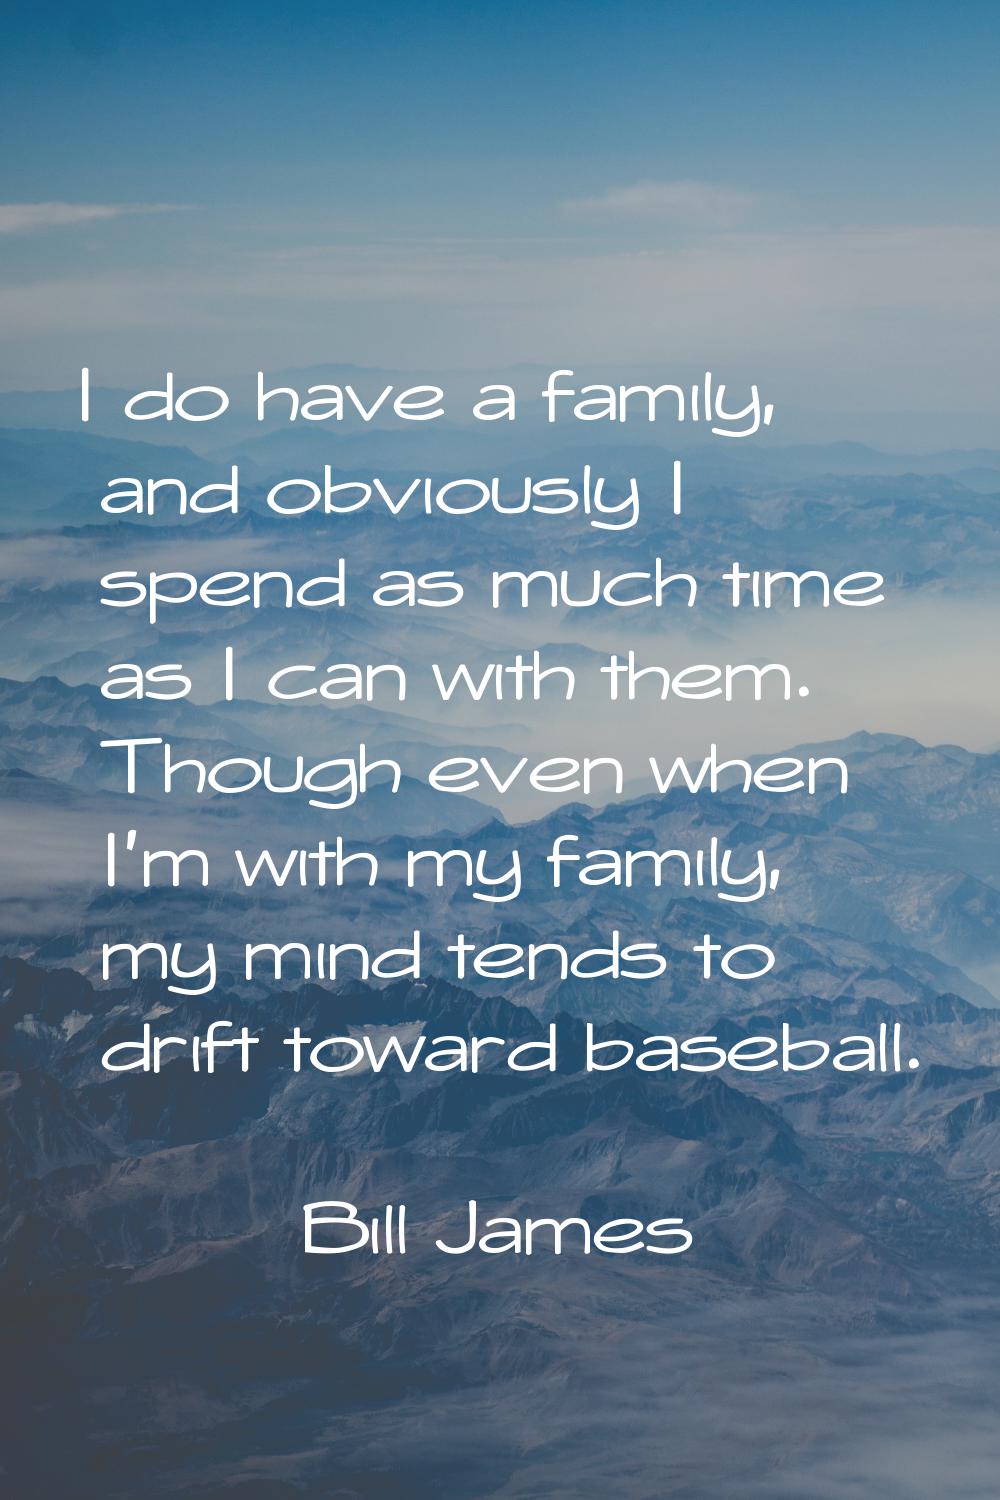 I do have a family, and obviously I spend as much time as I can with them. Though even when I'm wit